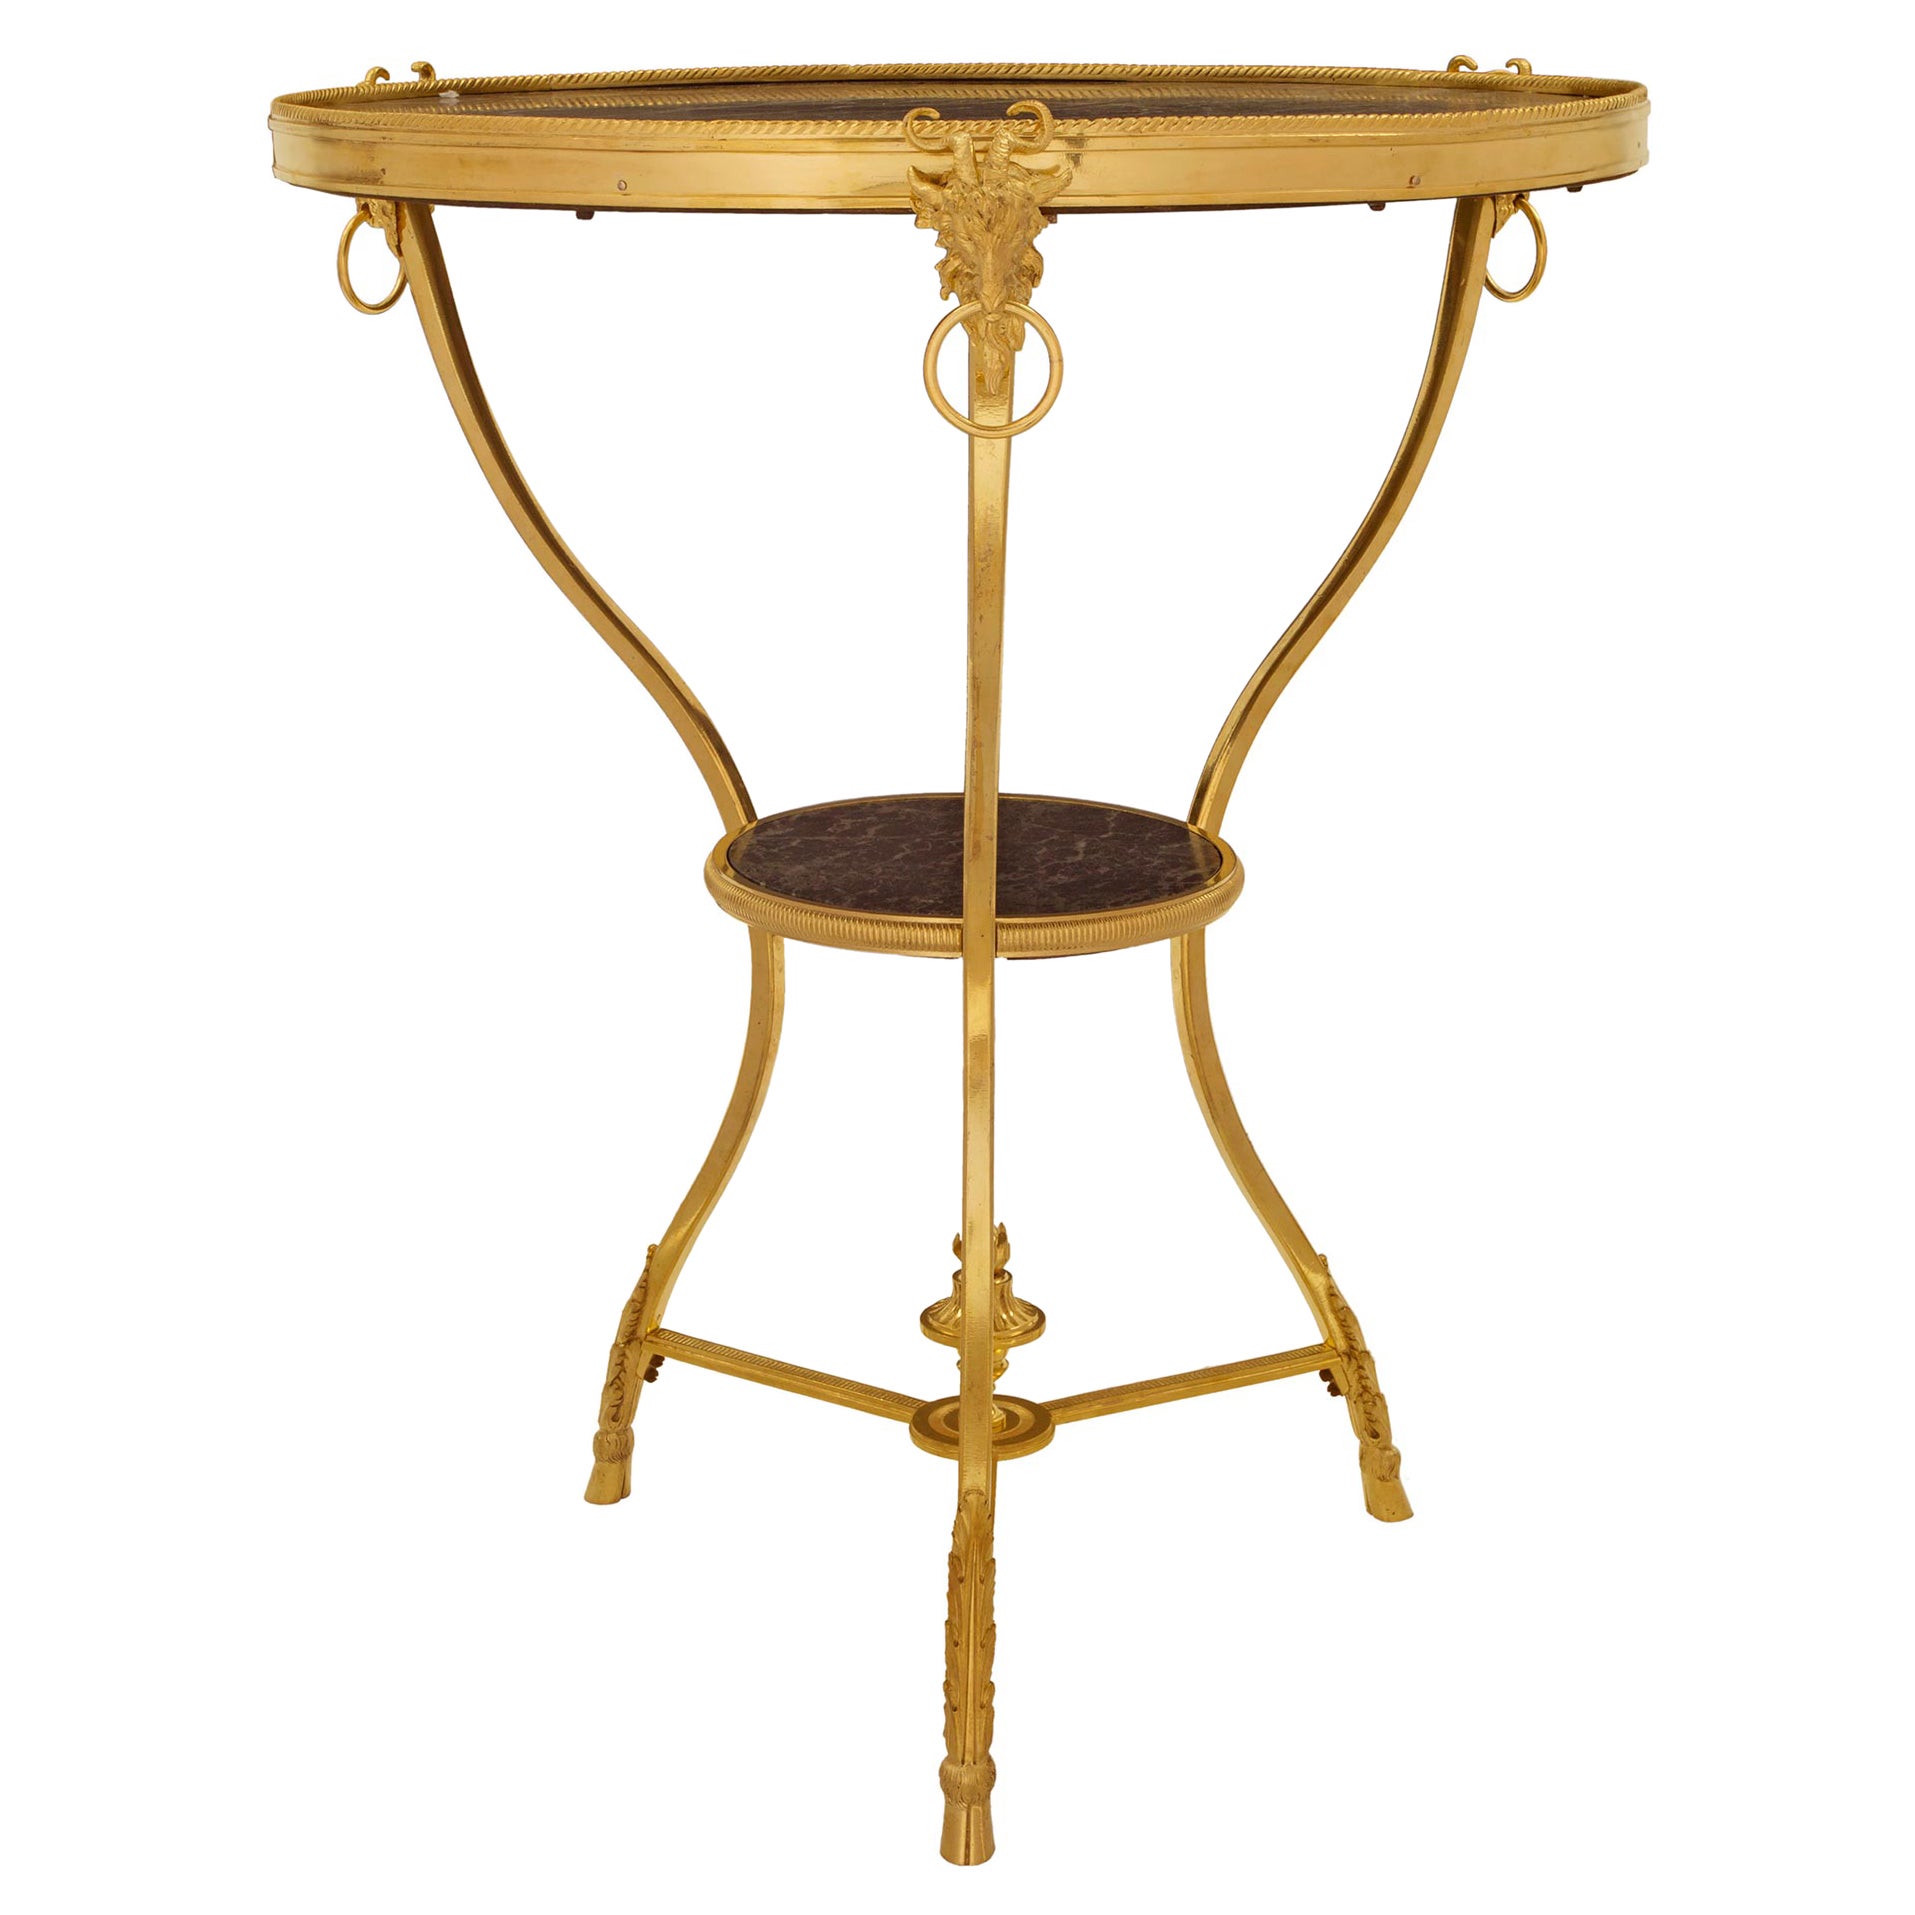 French 19th Century Louis XVI Style Ormolu and Marble Gueridon Side Table For Sale